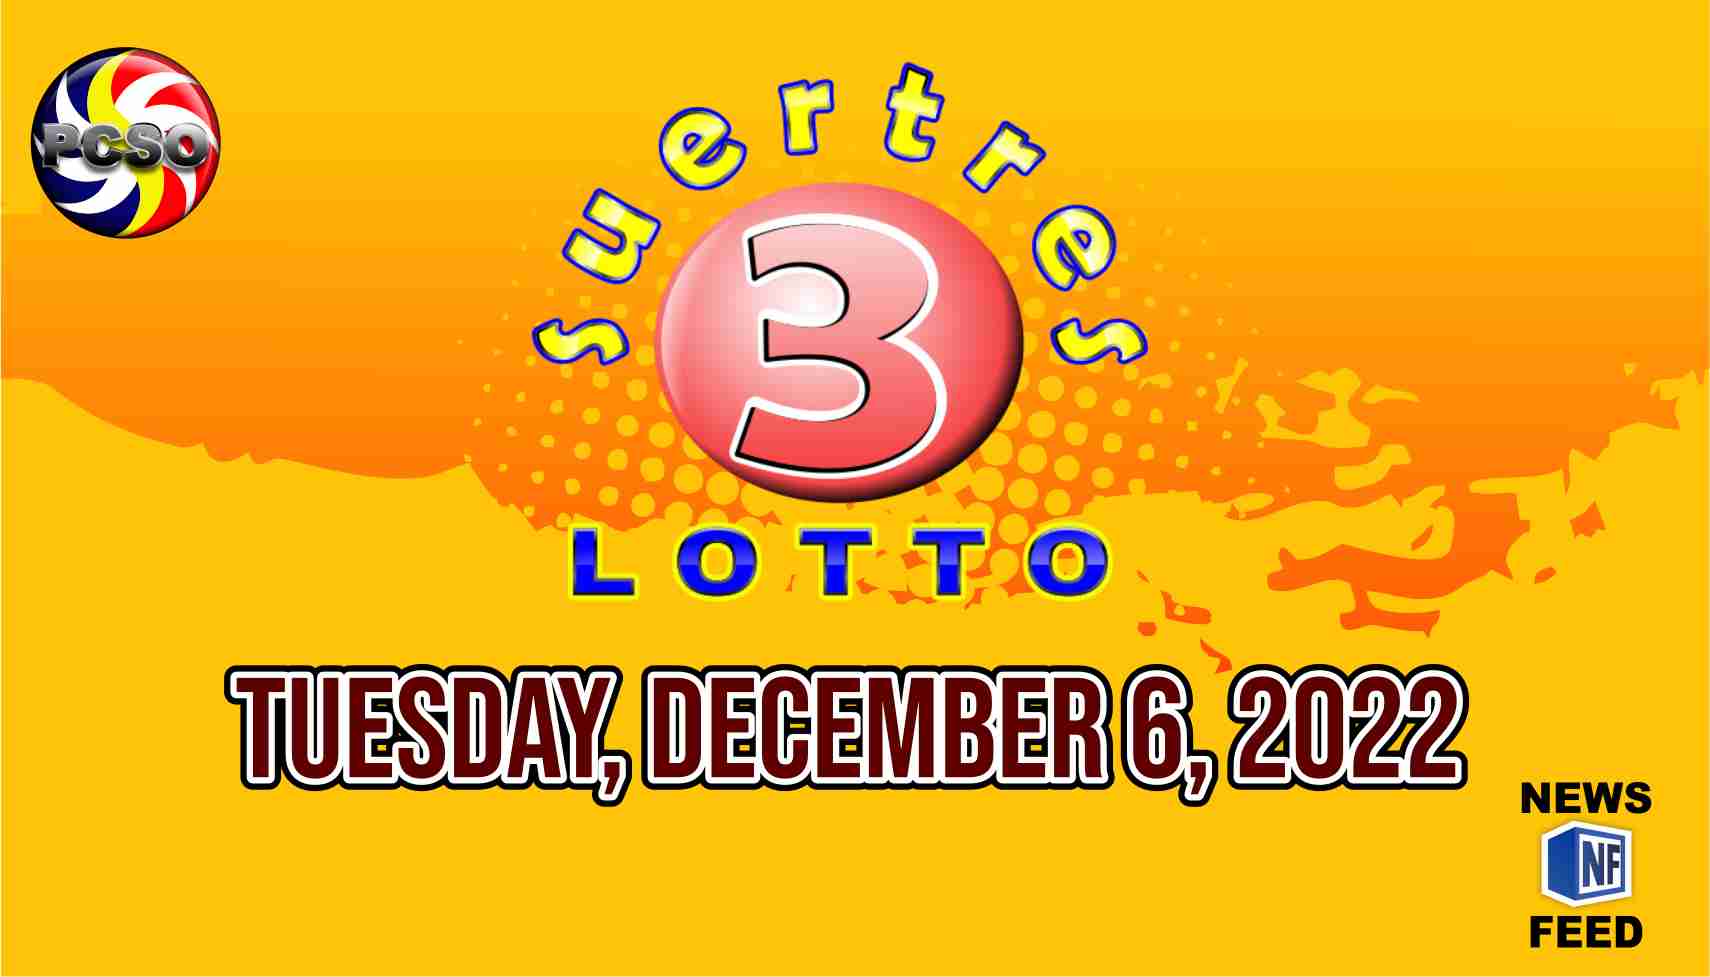 SWERTRES RESULT, Tuesday, December 6, 2022 Official PCSO Lotto Results